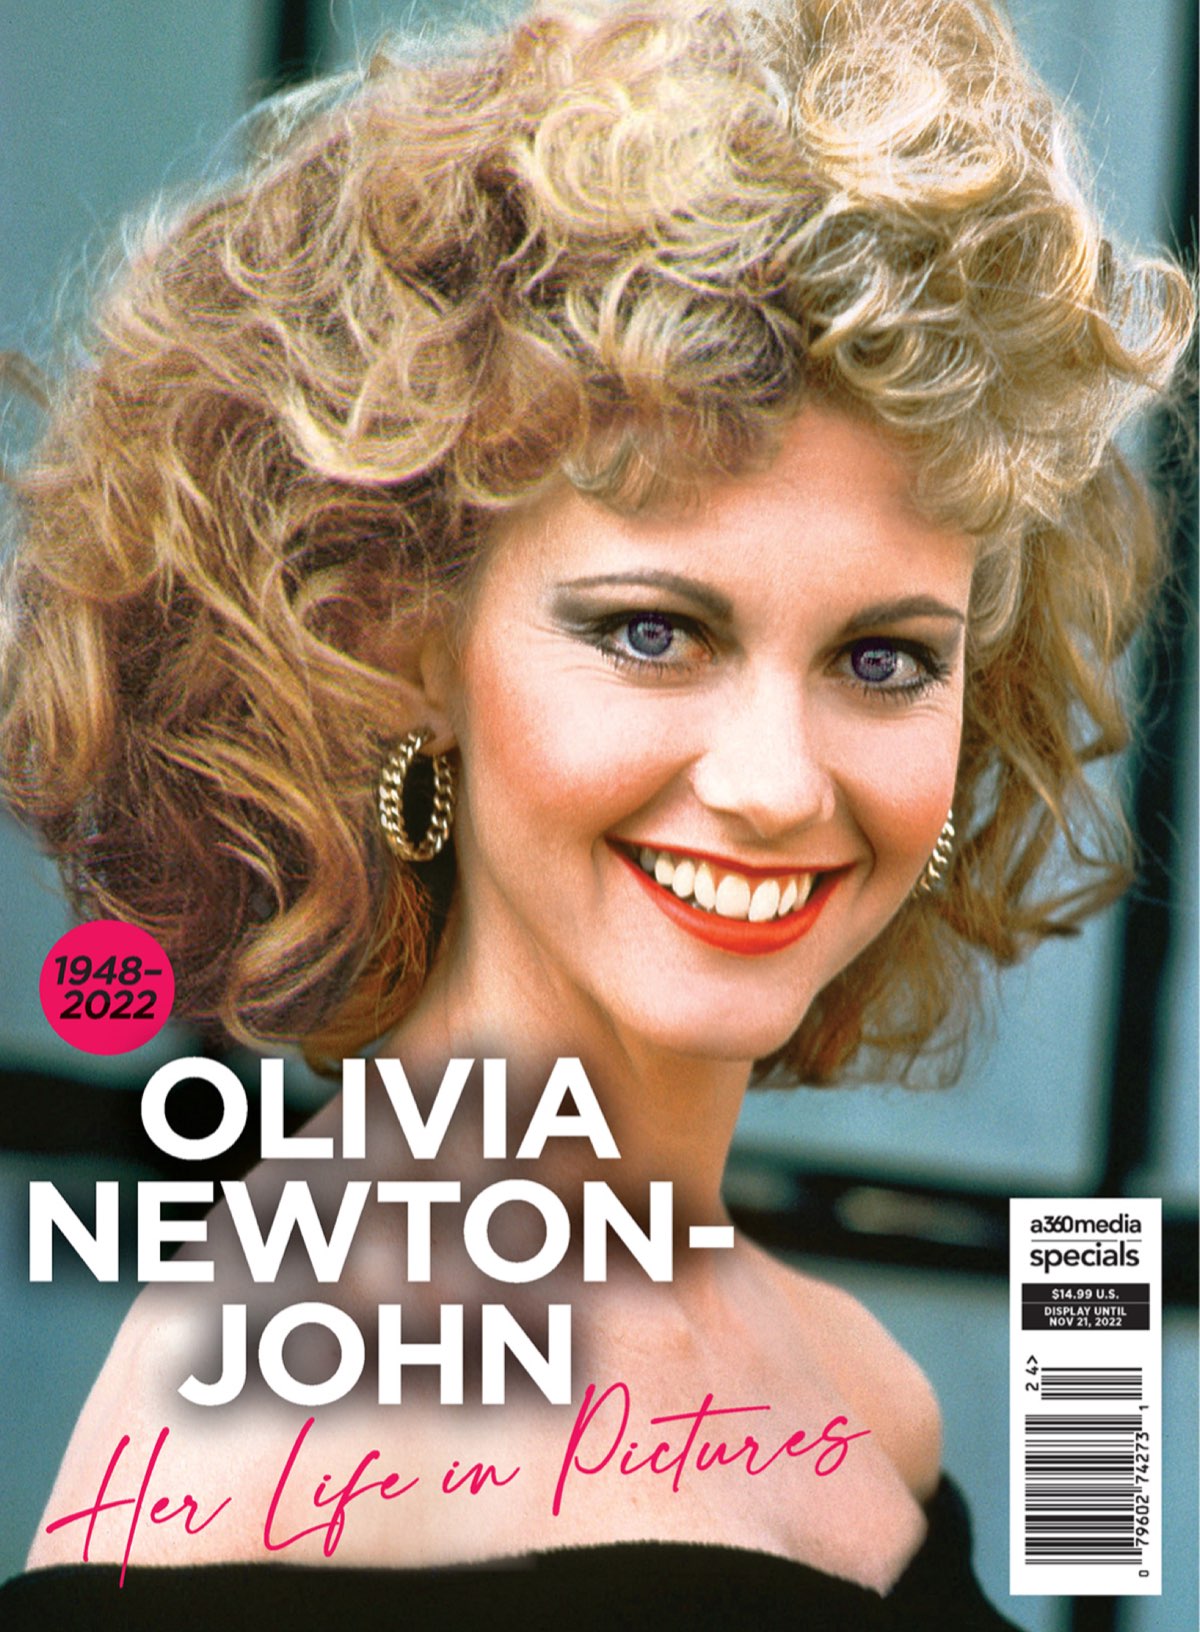 Olivia Newton-John - Her Life in Pictures [1948-2022]